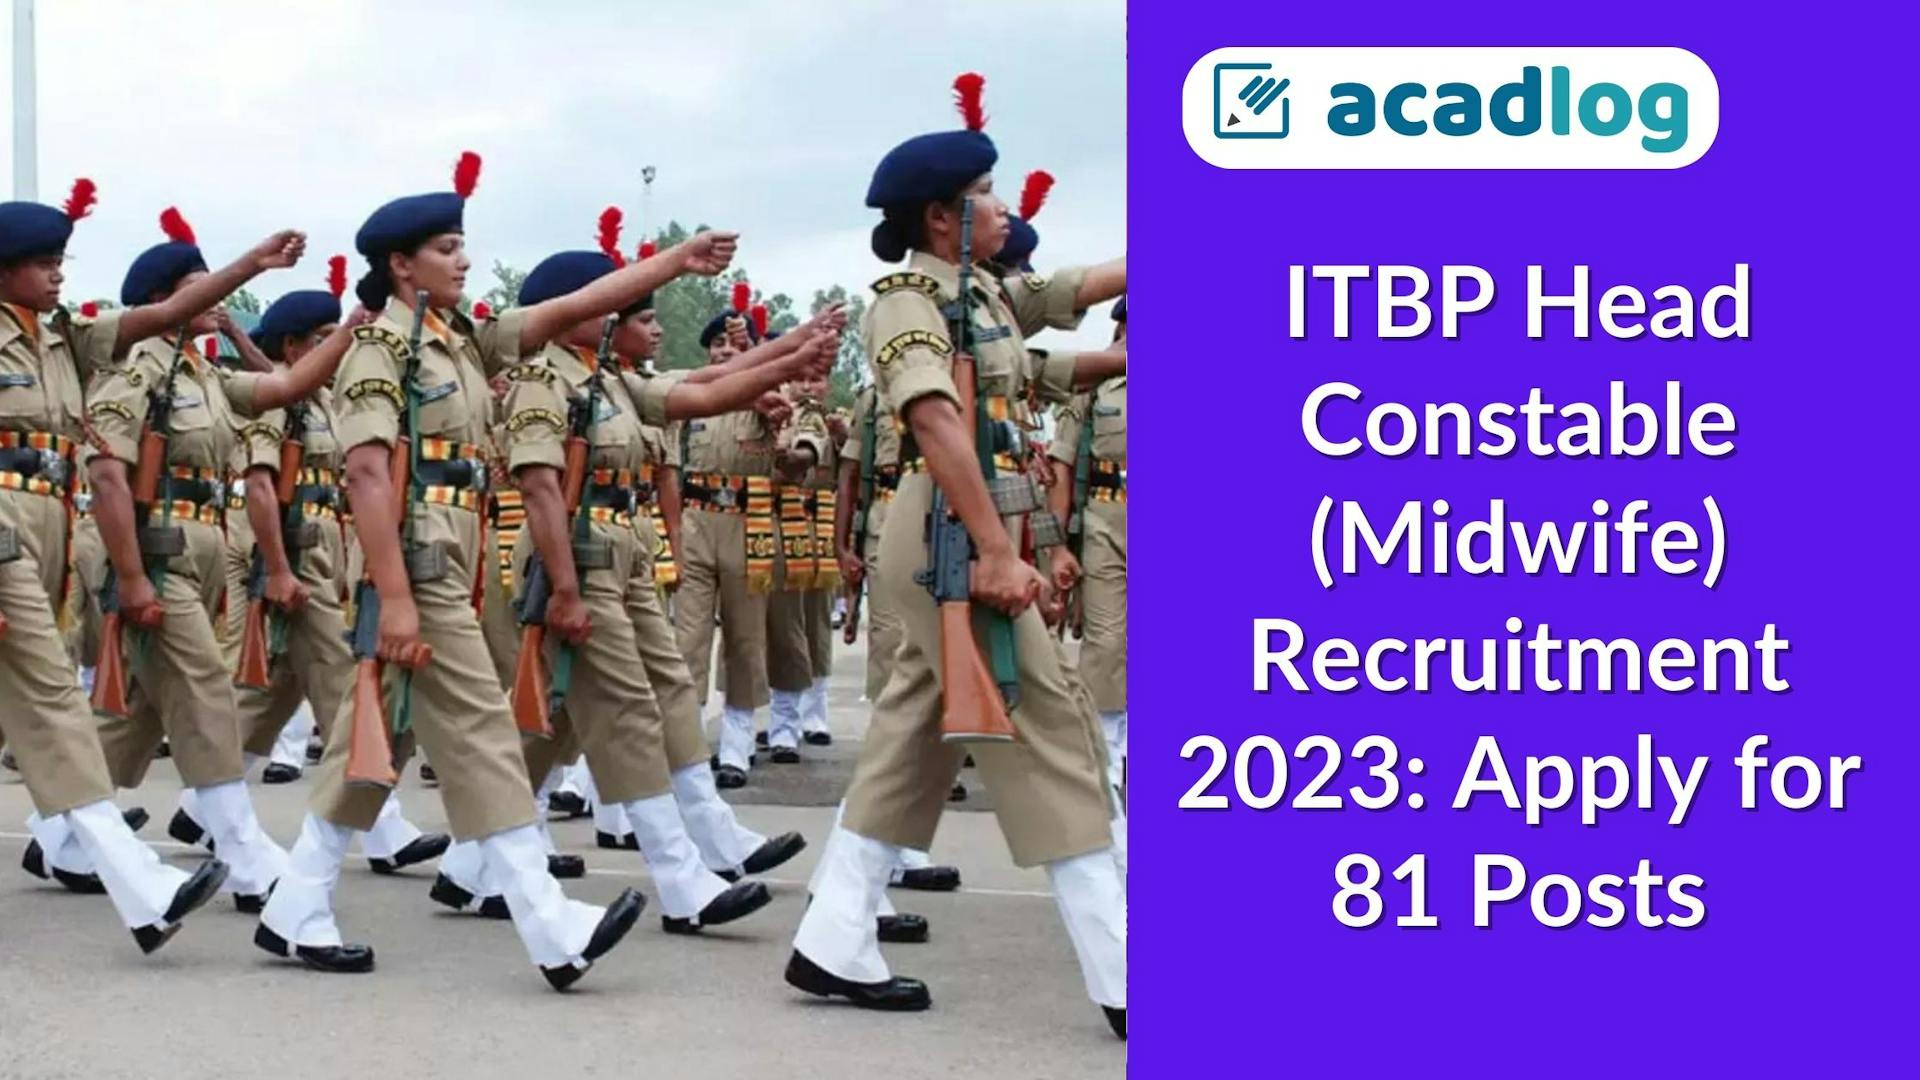 ITBP Head Constable (Midwife) Recruitment 2023: Apply for 81 Posts